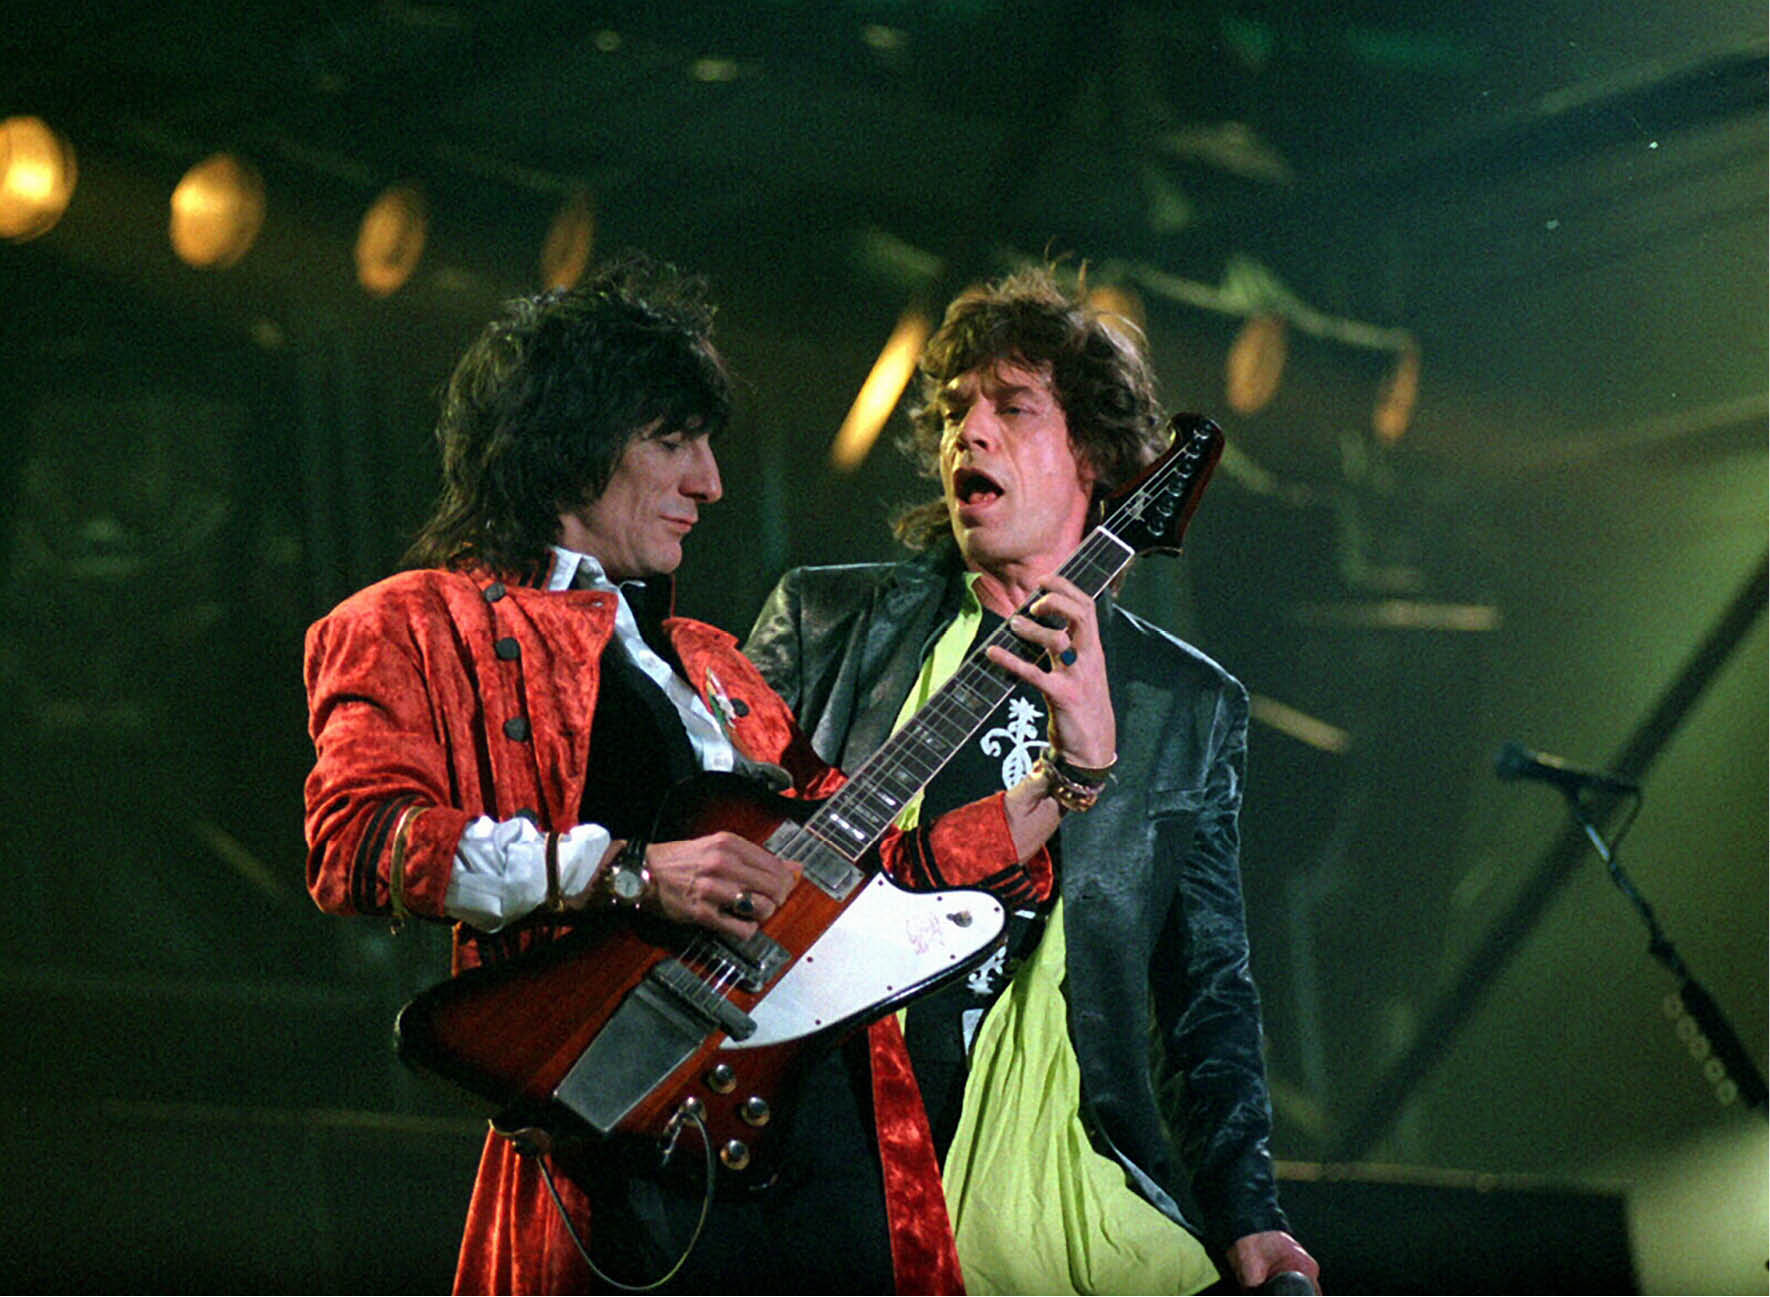 Mandatory Credit: Photo by Roy Haverkamp/Newspix / Rex Features ( 874066a ) The Rolling Stones - Ronnie Wood and Mick Jagger The Rolling Stones in concert during Australian leg of Voodoo lounge tour, Sydney Cricket Ground, Sydney, Australia - 02 Apr 1995